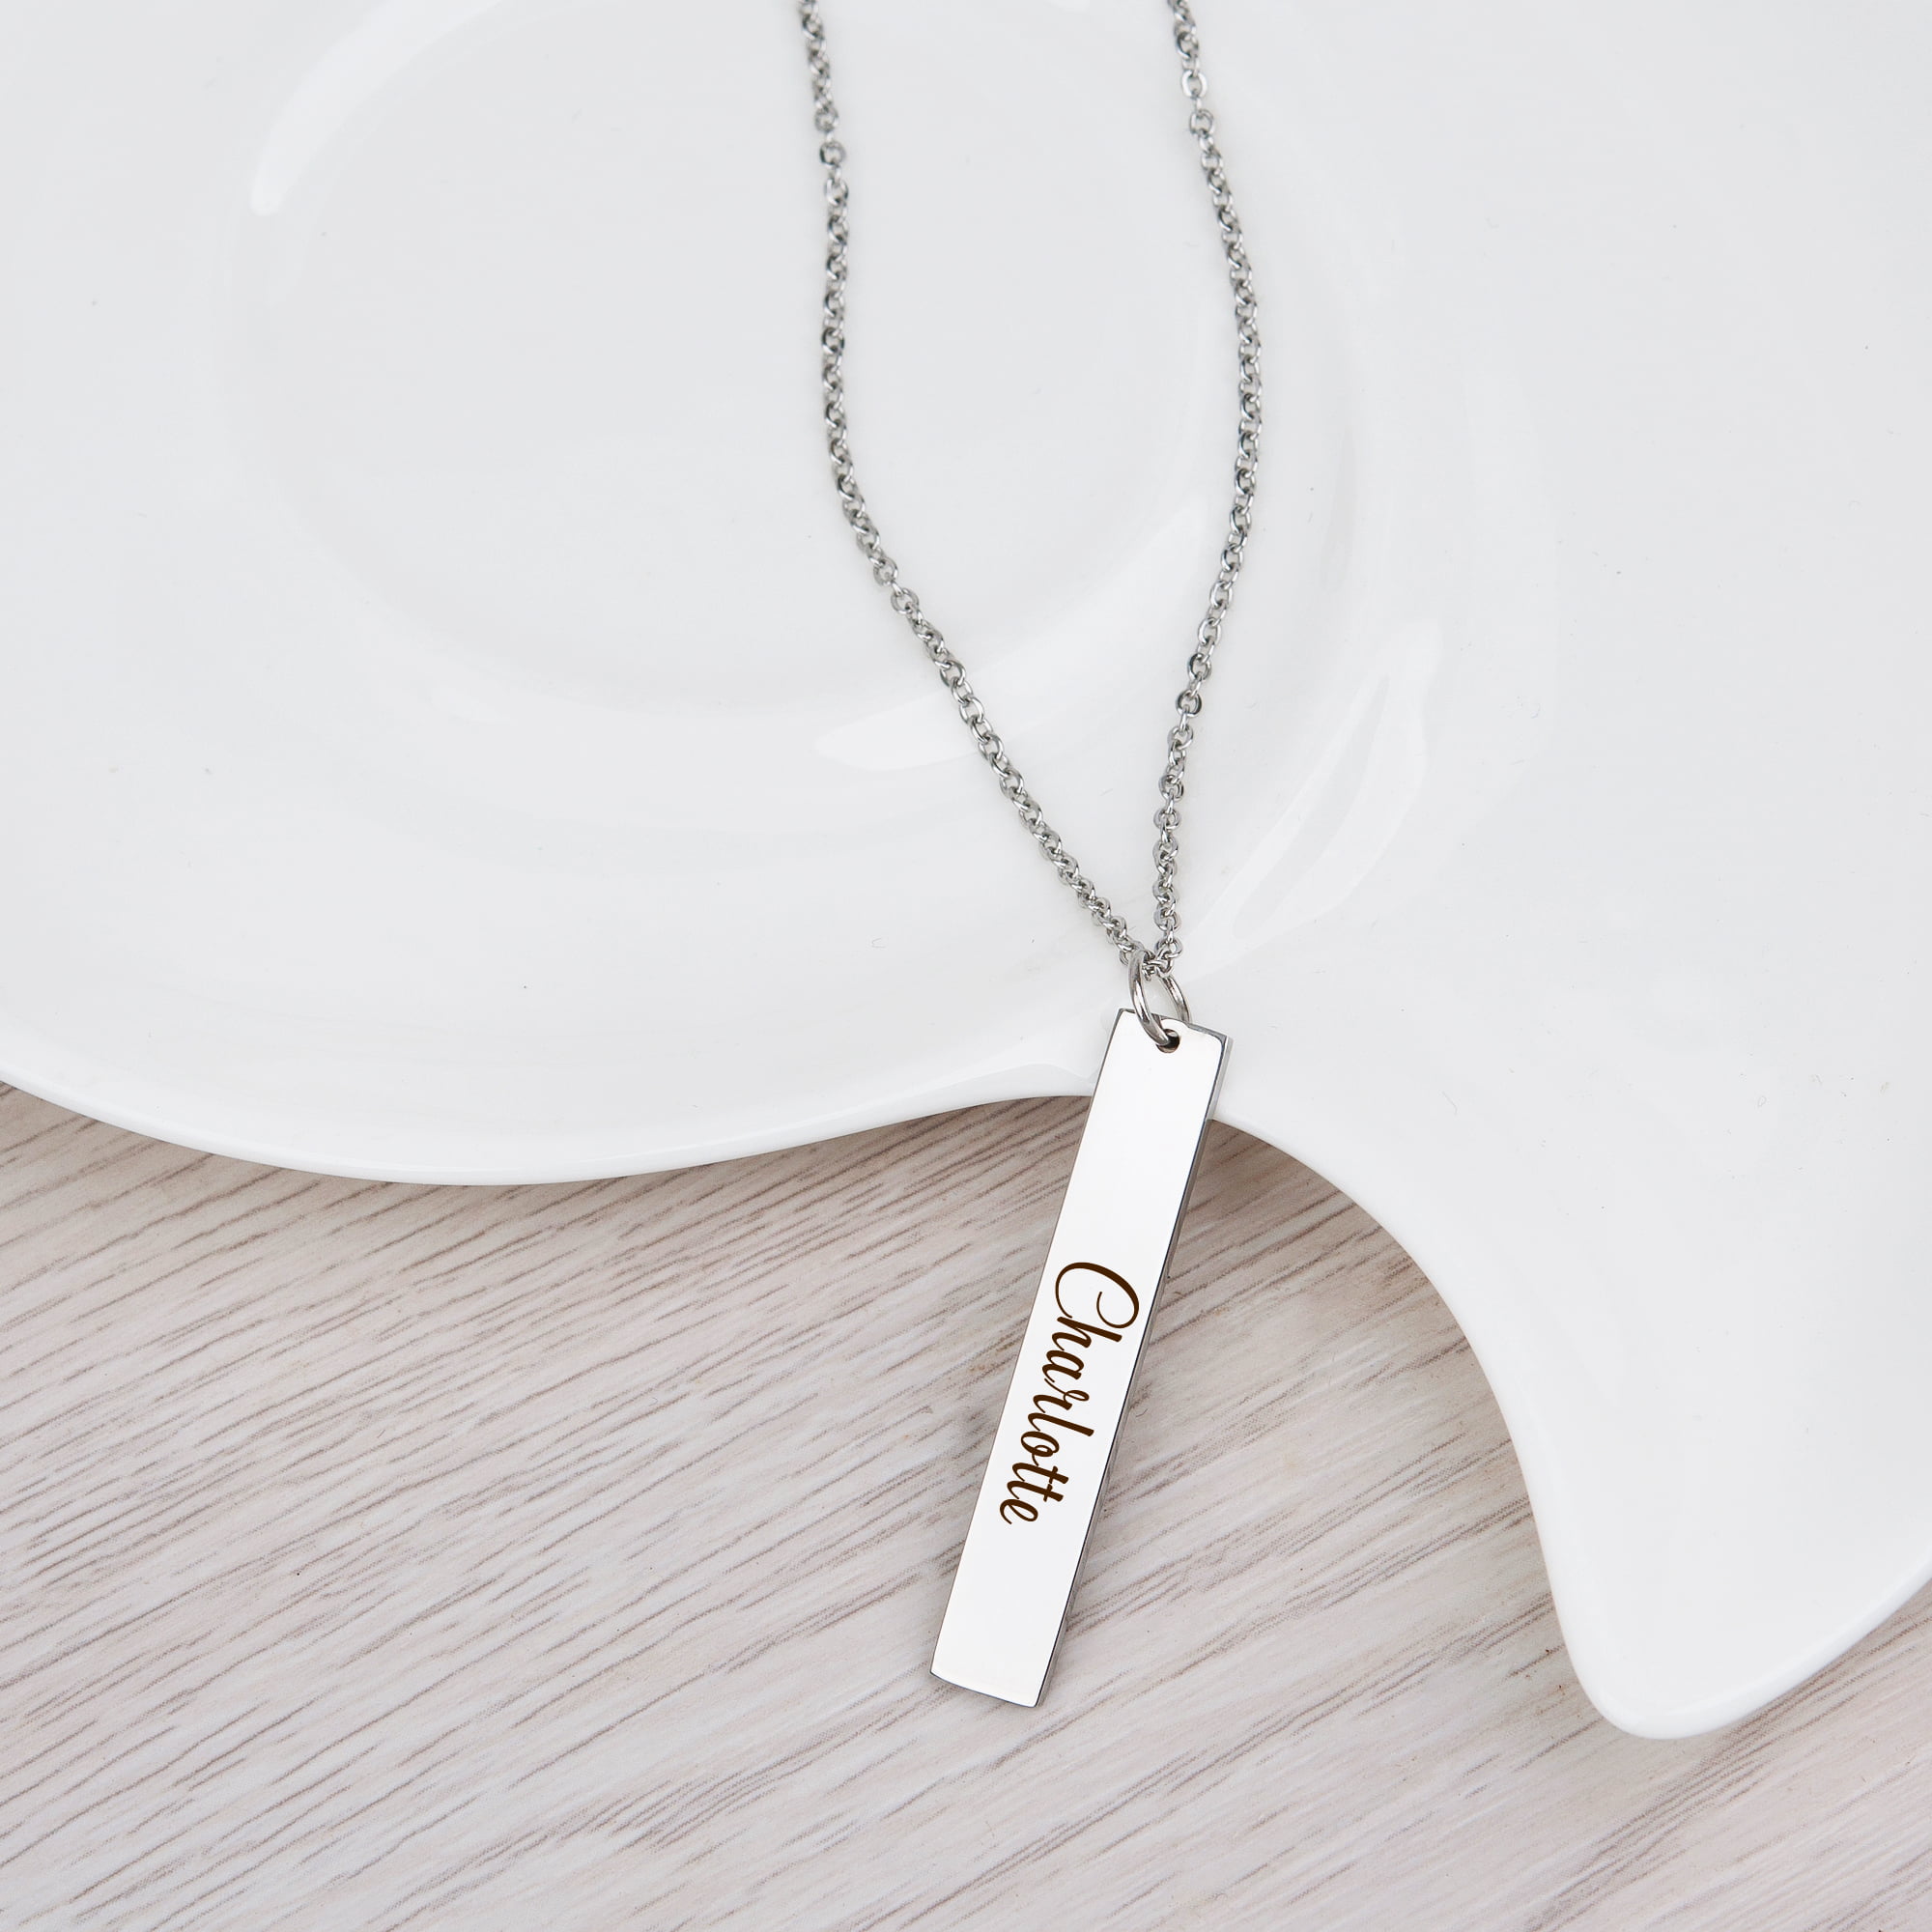 Large Engraved Bar Necklace - Sterling Silver or Gold-Plated - Danique  Jewelry